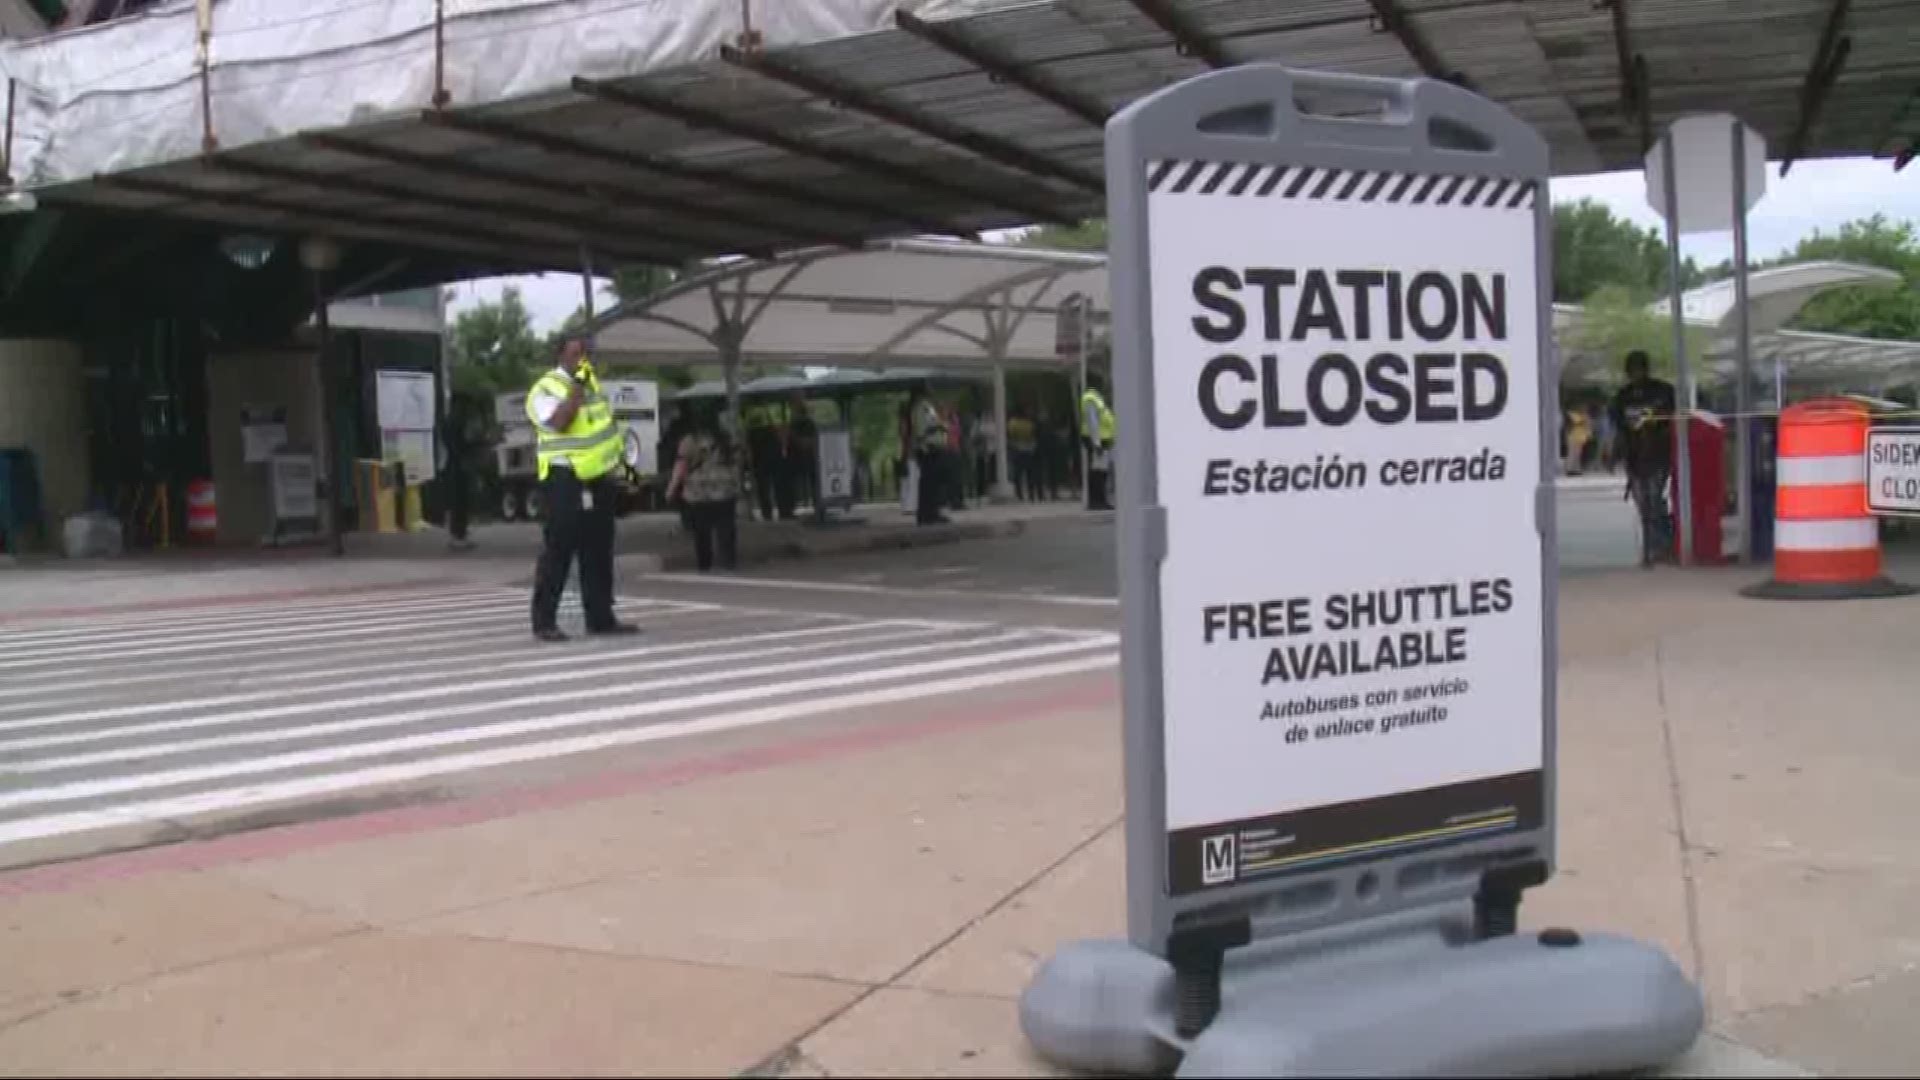 Six Metro stations -- Braddock Road, King Street, Eisenhower Avenue, Huntington, Van Dorn and Franconia Springfield -- are closed until September to address safety issues, officials said.